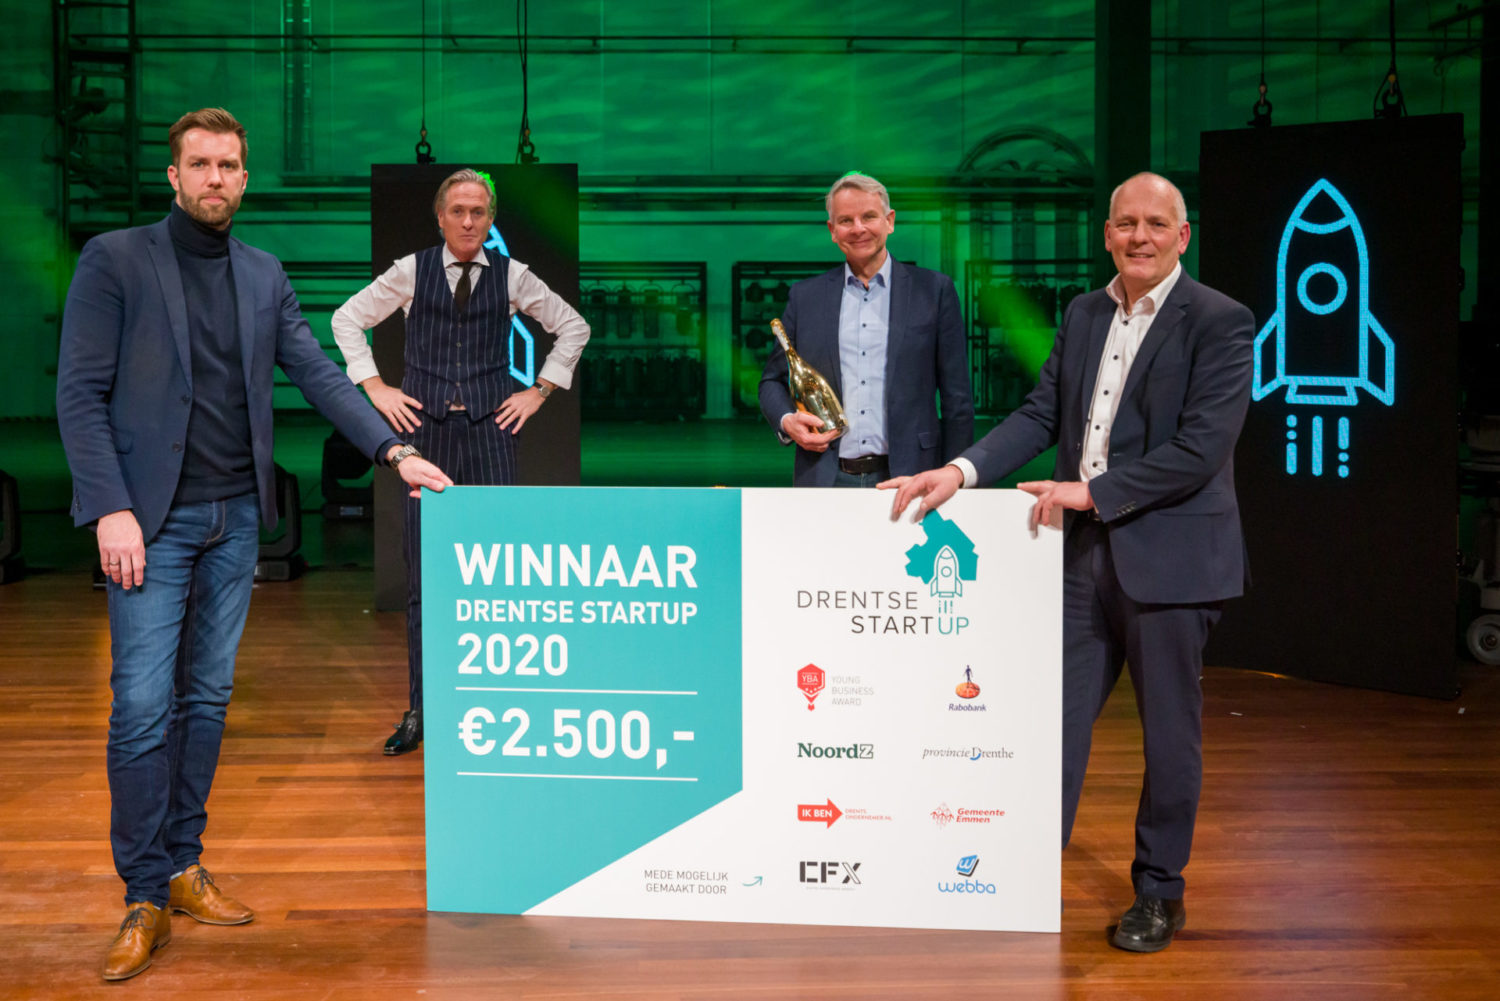 New edition Drenthe Startup: "A strong stage with 130,000 viewers on RTL-Z &amp; Videoland"